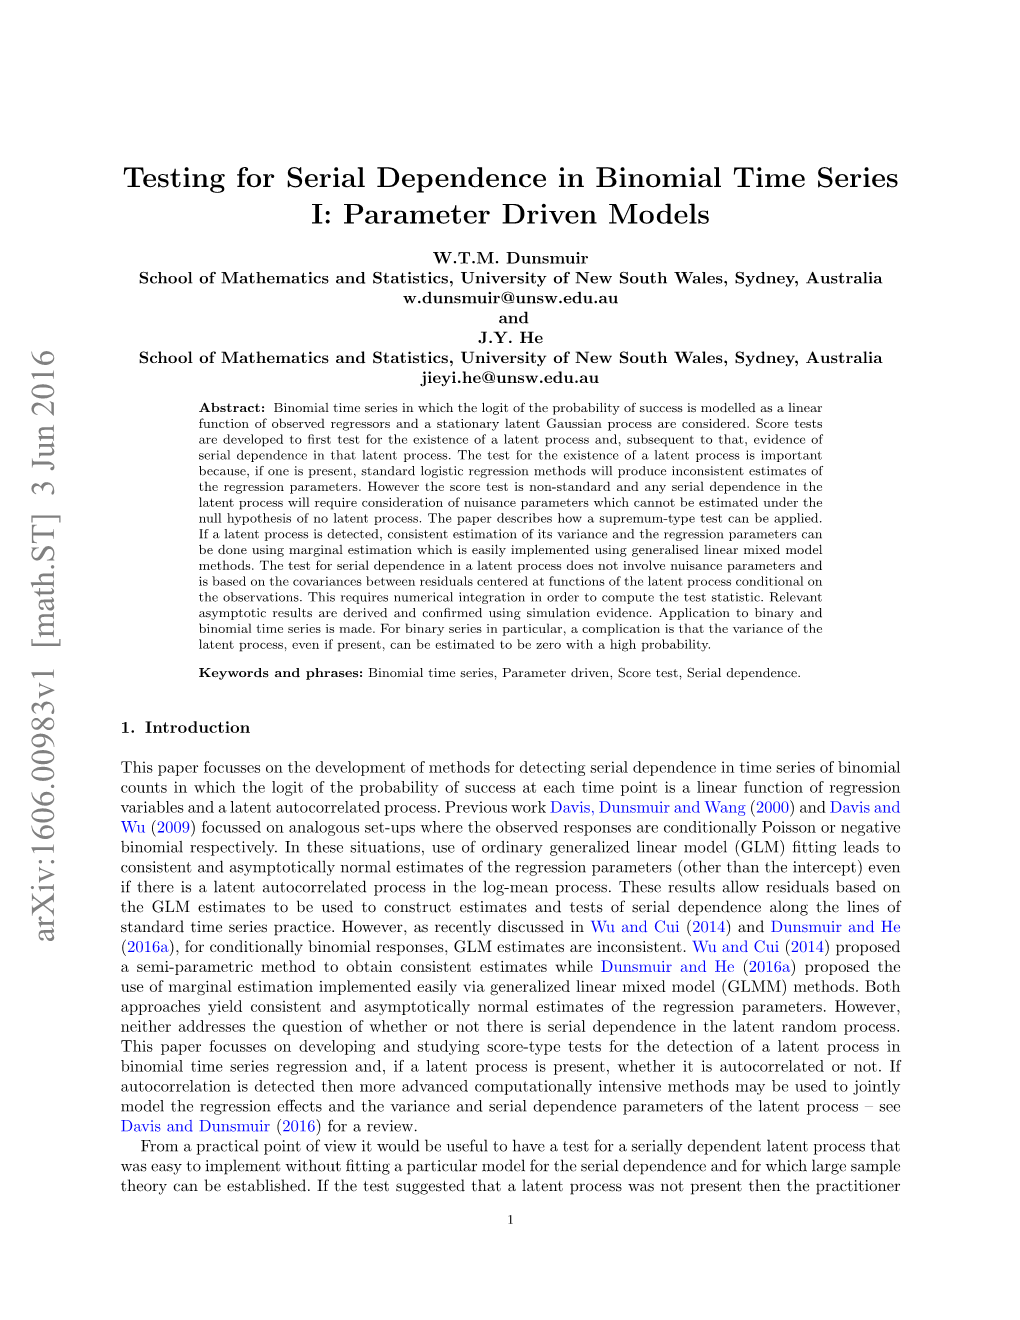 Testing for Serial Dependence in Binomial Time Series I: Parameter Driven Models